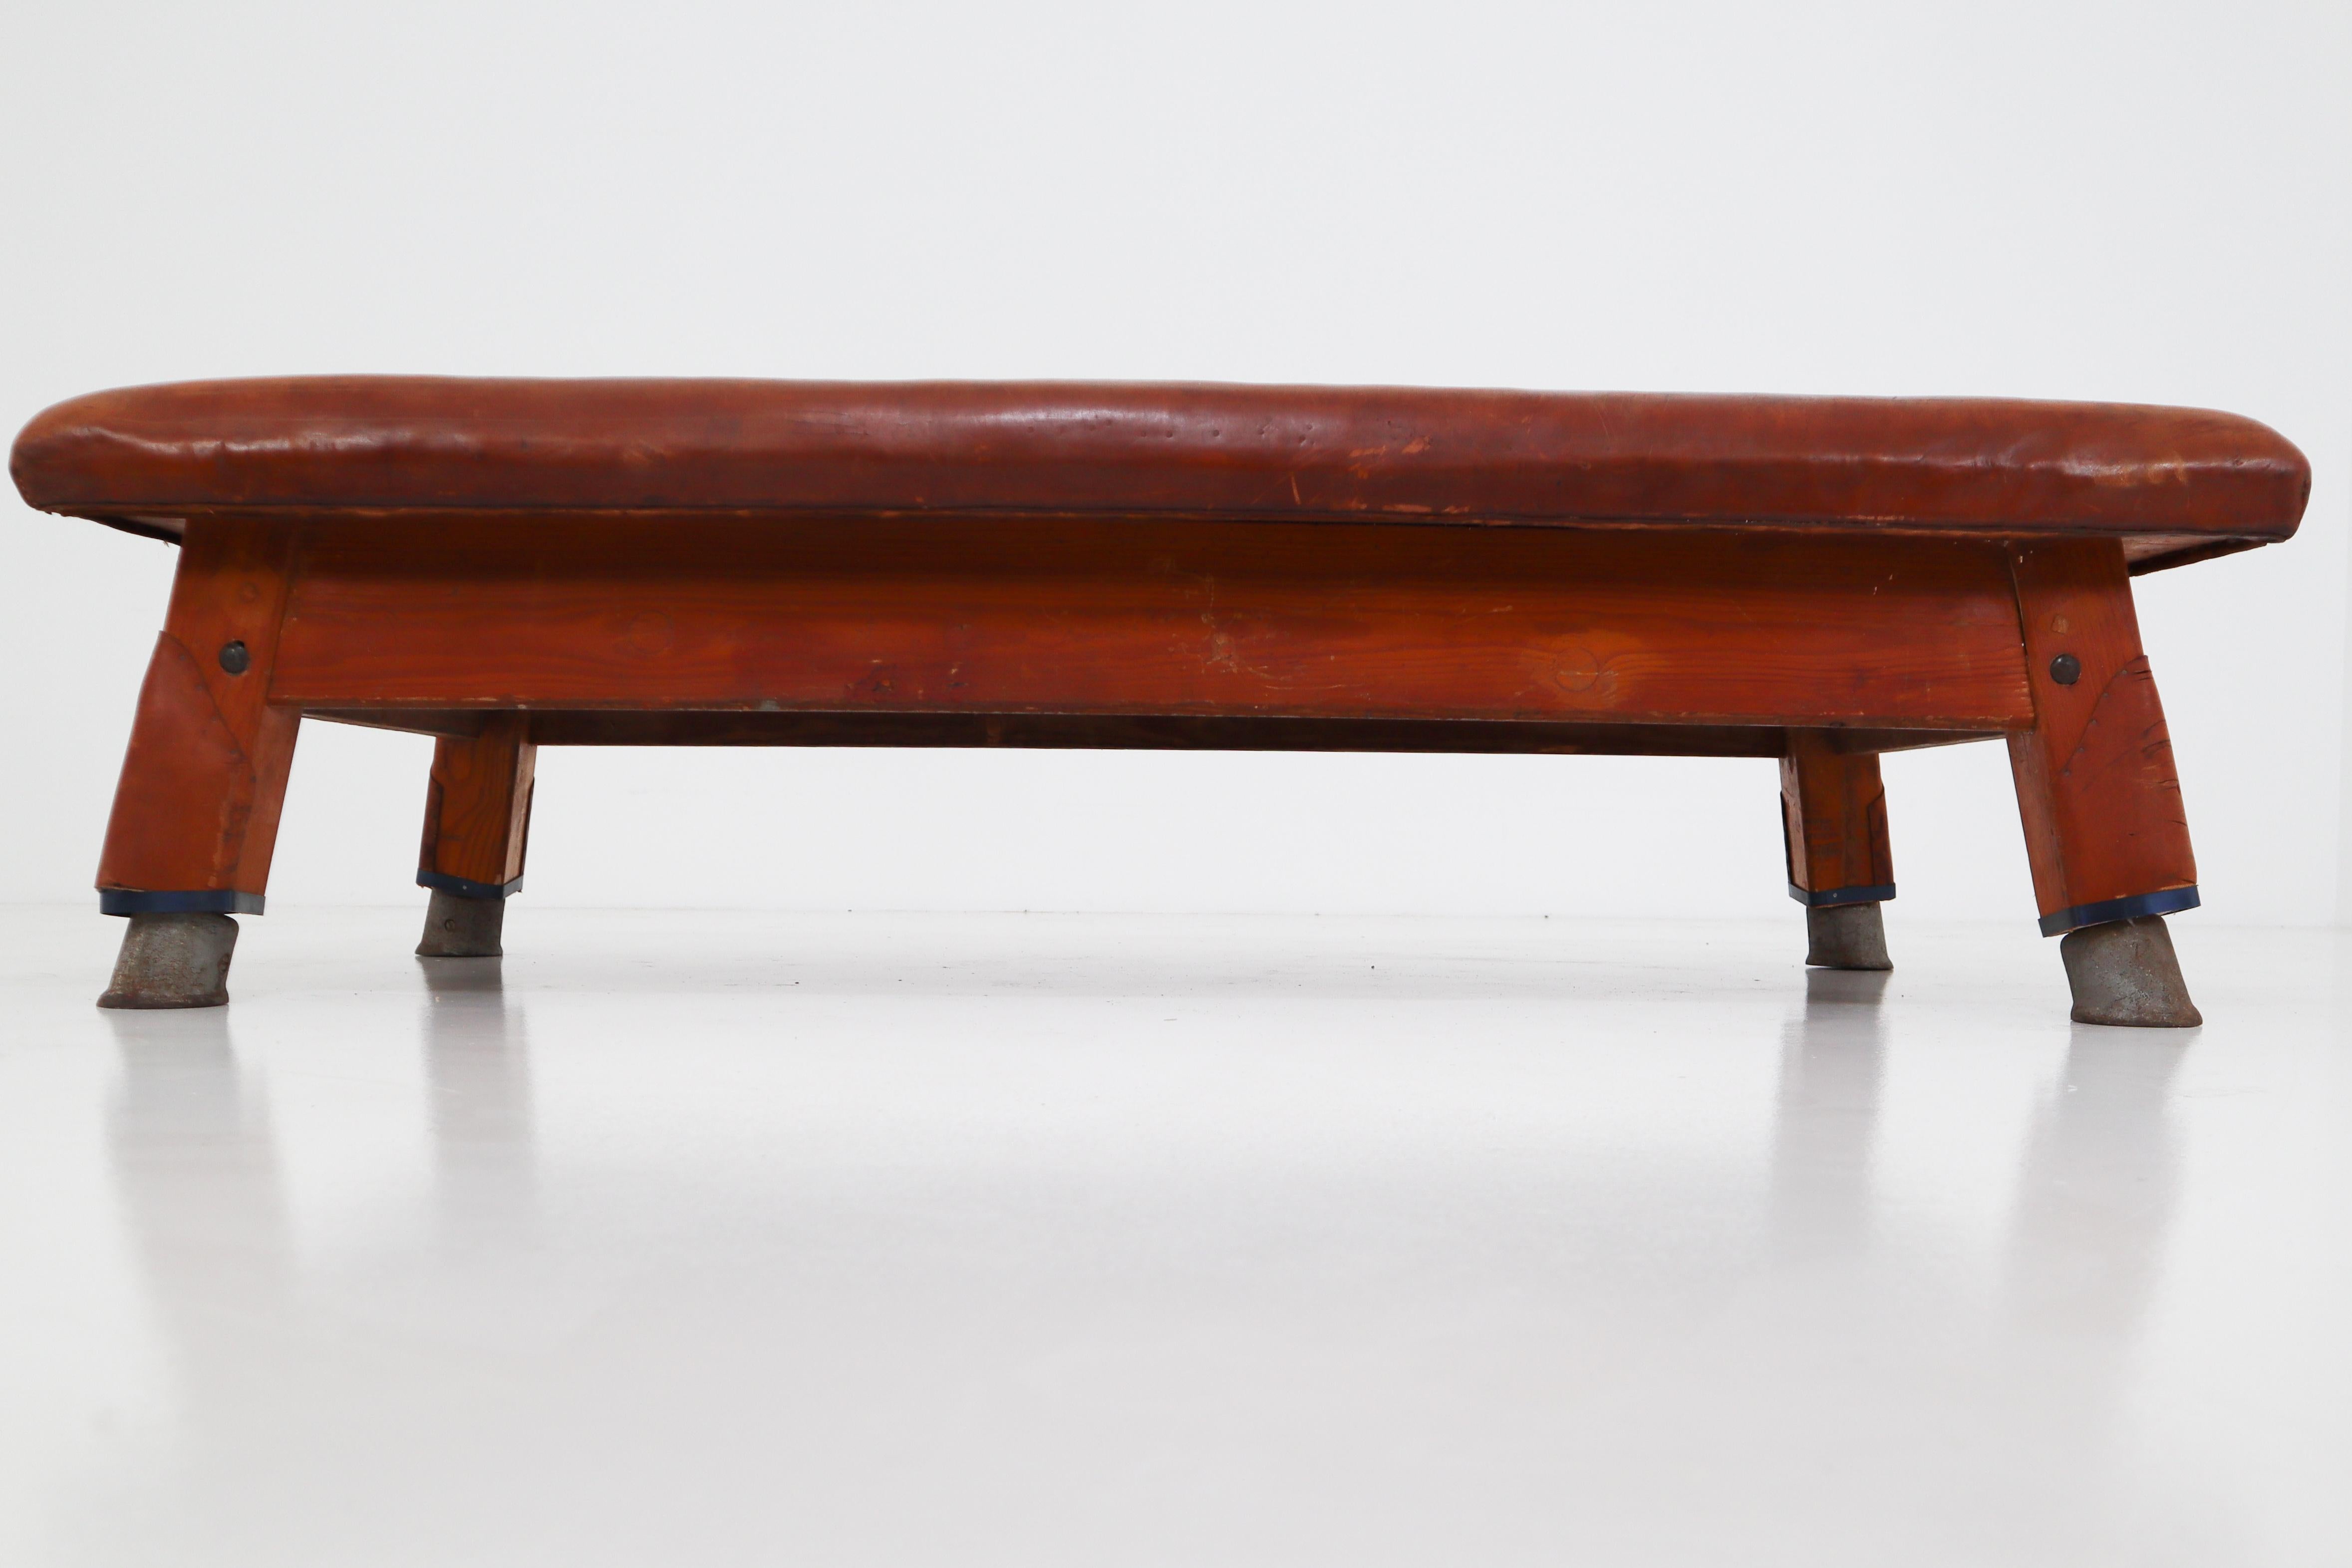 Other Vintage Patinated Leather Gym Bench or Table, circa 1940